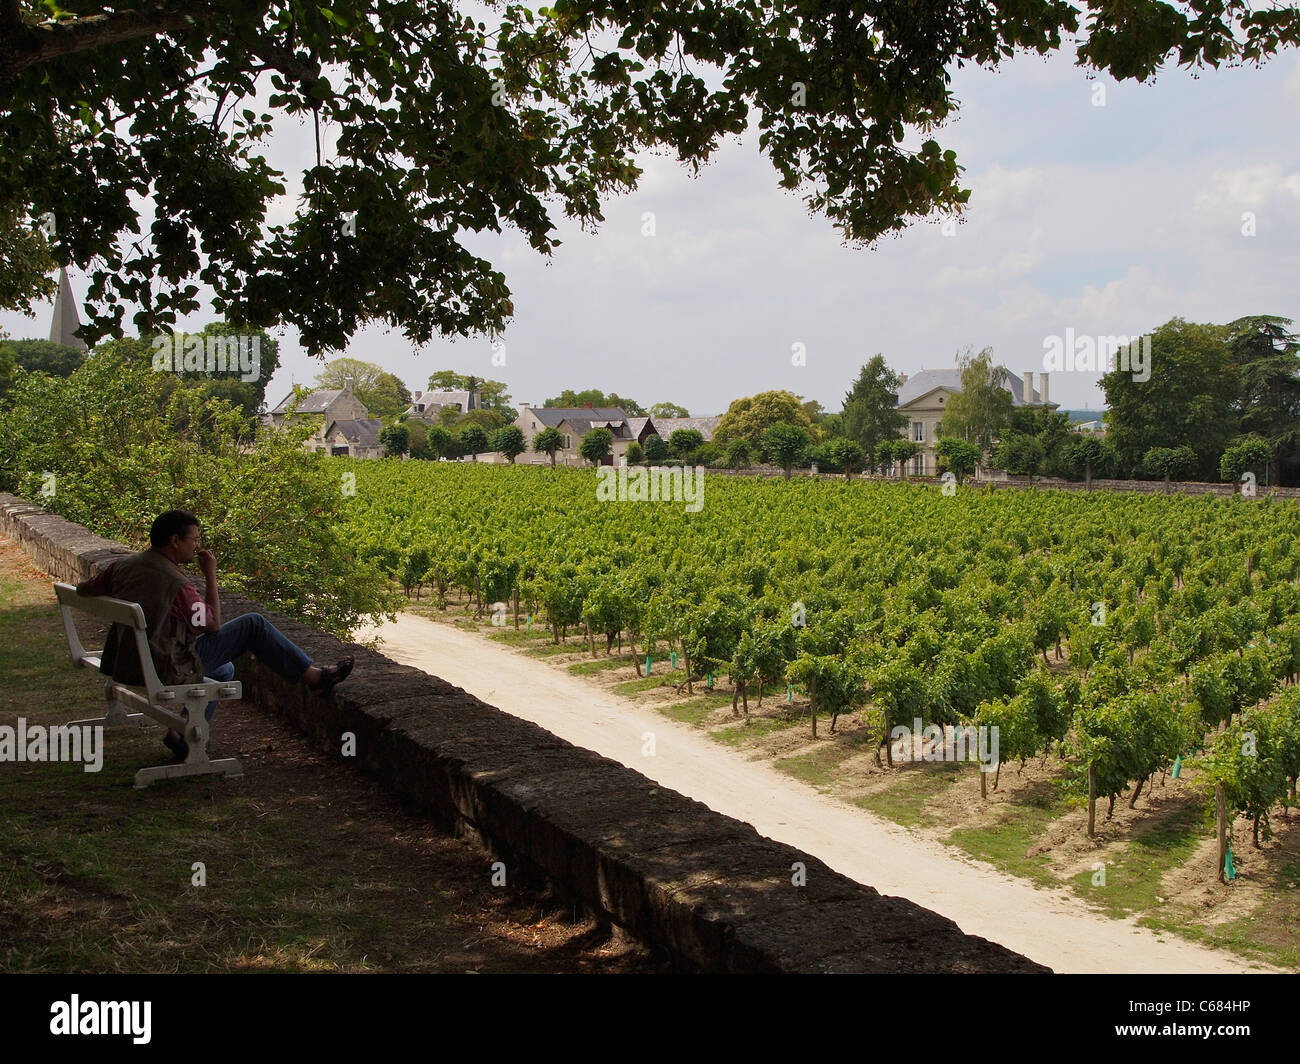 Man sitting in the shade overlooking a vineyard in the sun, near Saumur, Anjou, Loire valley, France Stock Photo